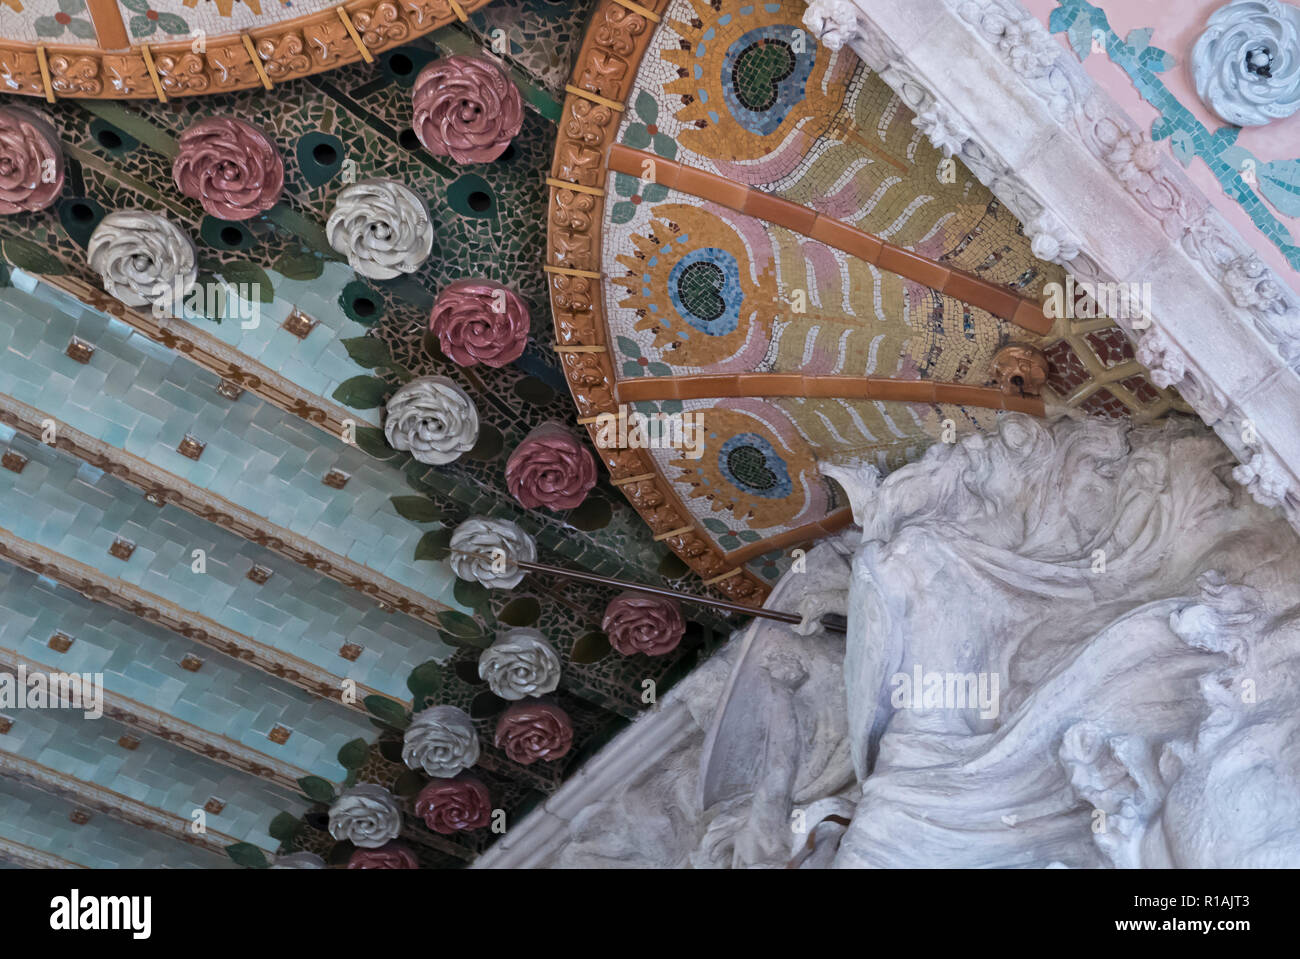 Roses decorations on the ceiling of the Palau De La Musica, Barcelona, Spain Stock Photo